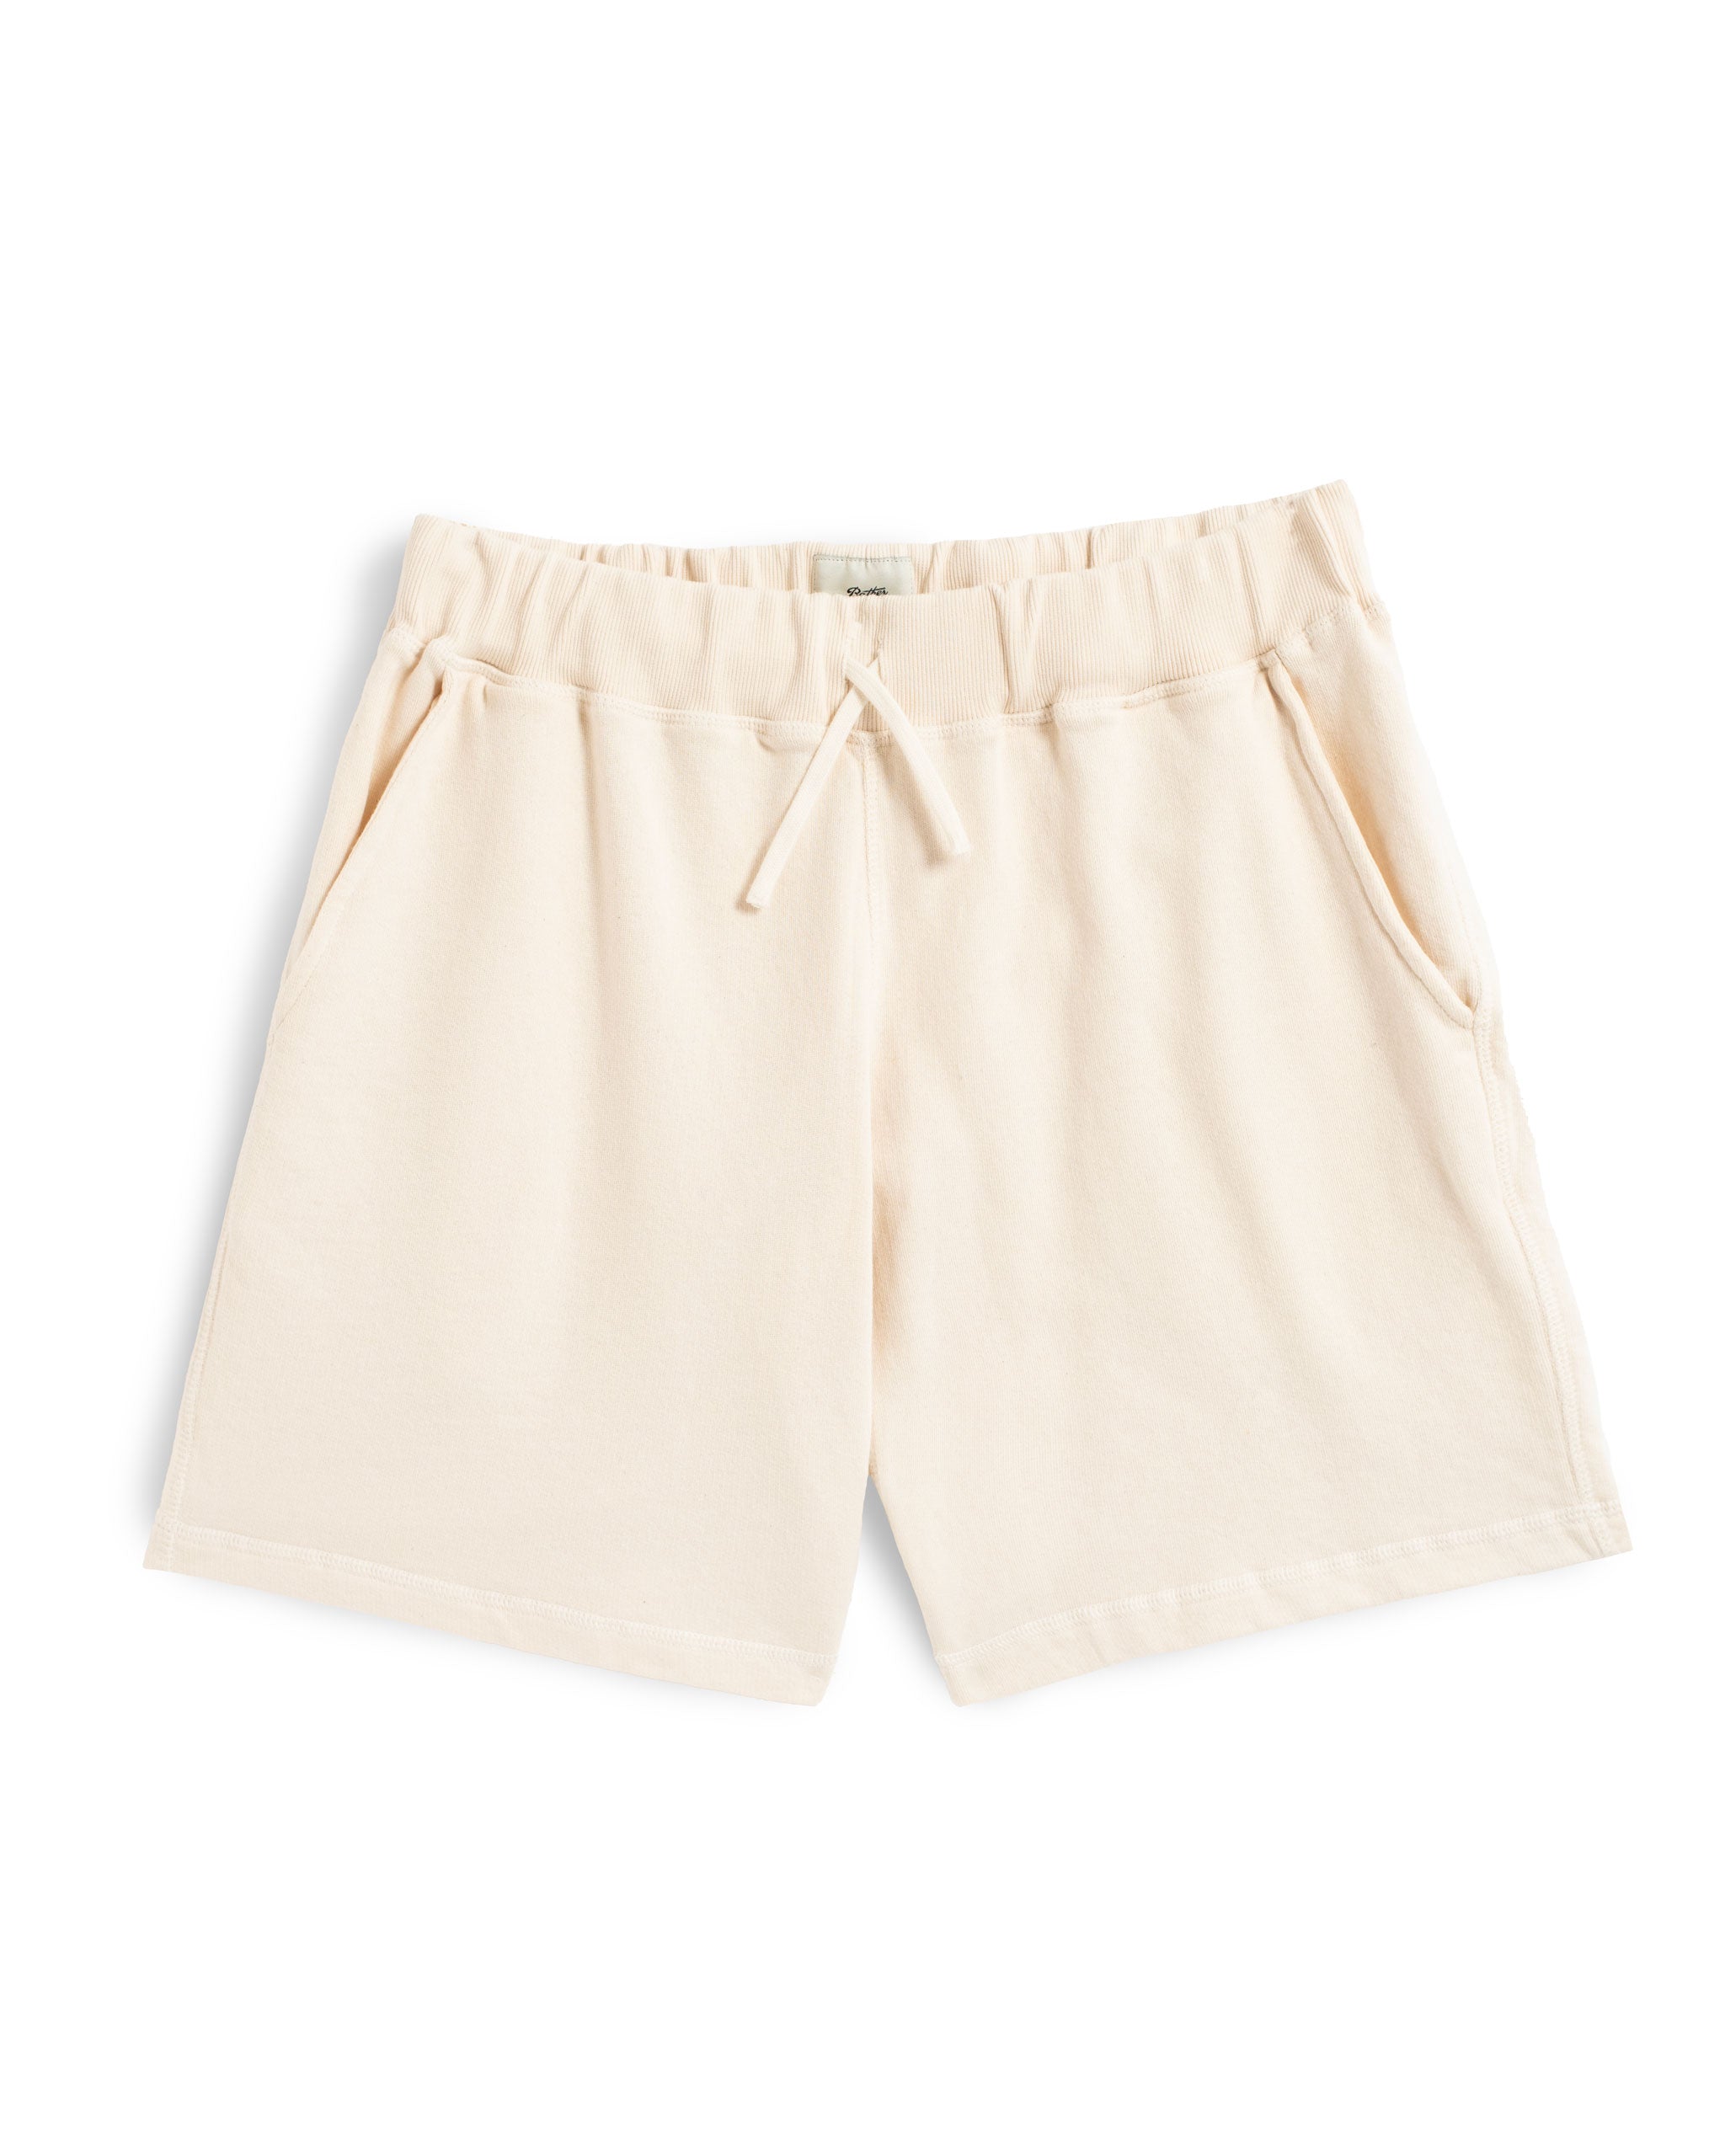 Natural ivory french terry cotton Sweat Shorts